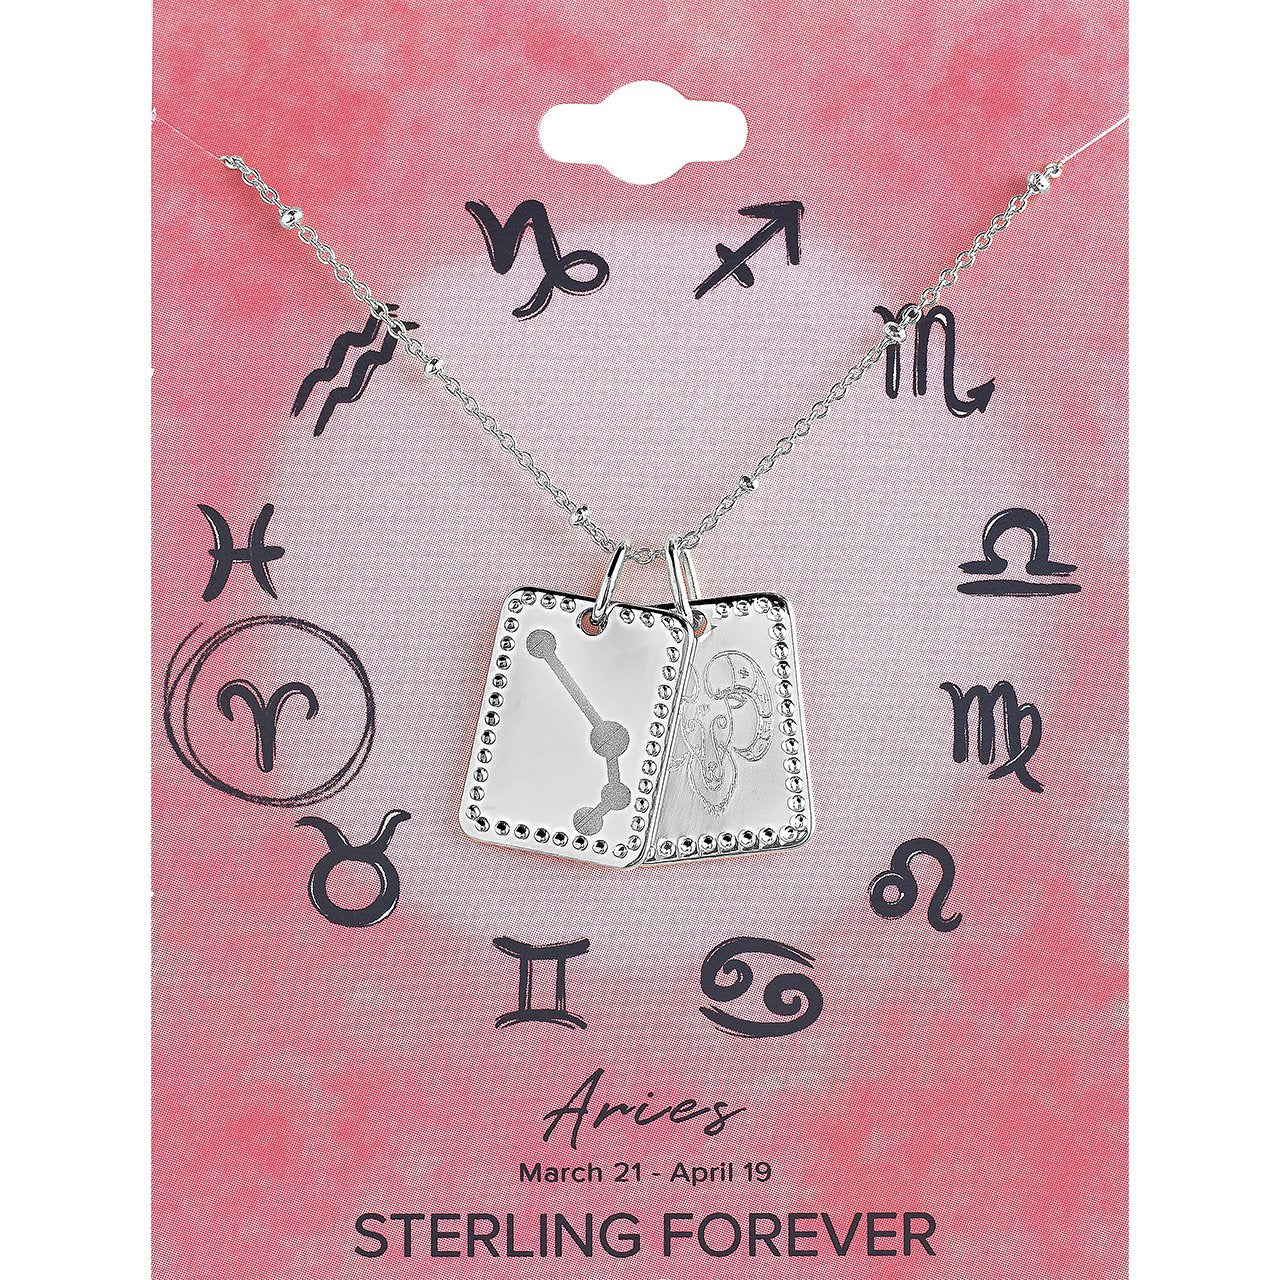 Zodiac Tag Necklace by Sterling Forever